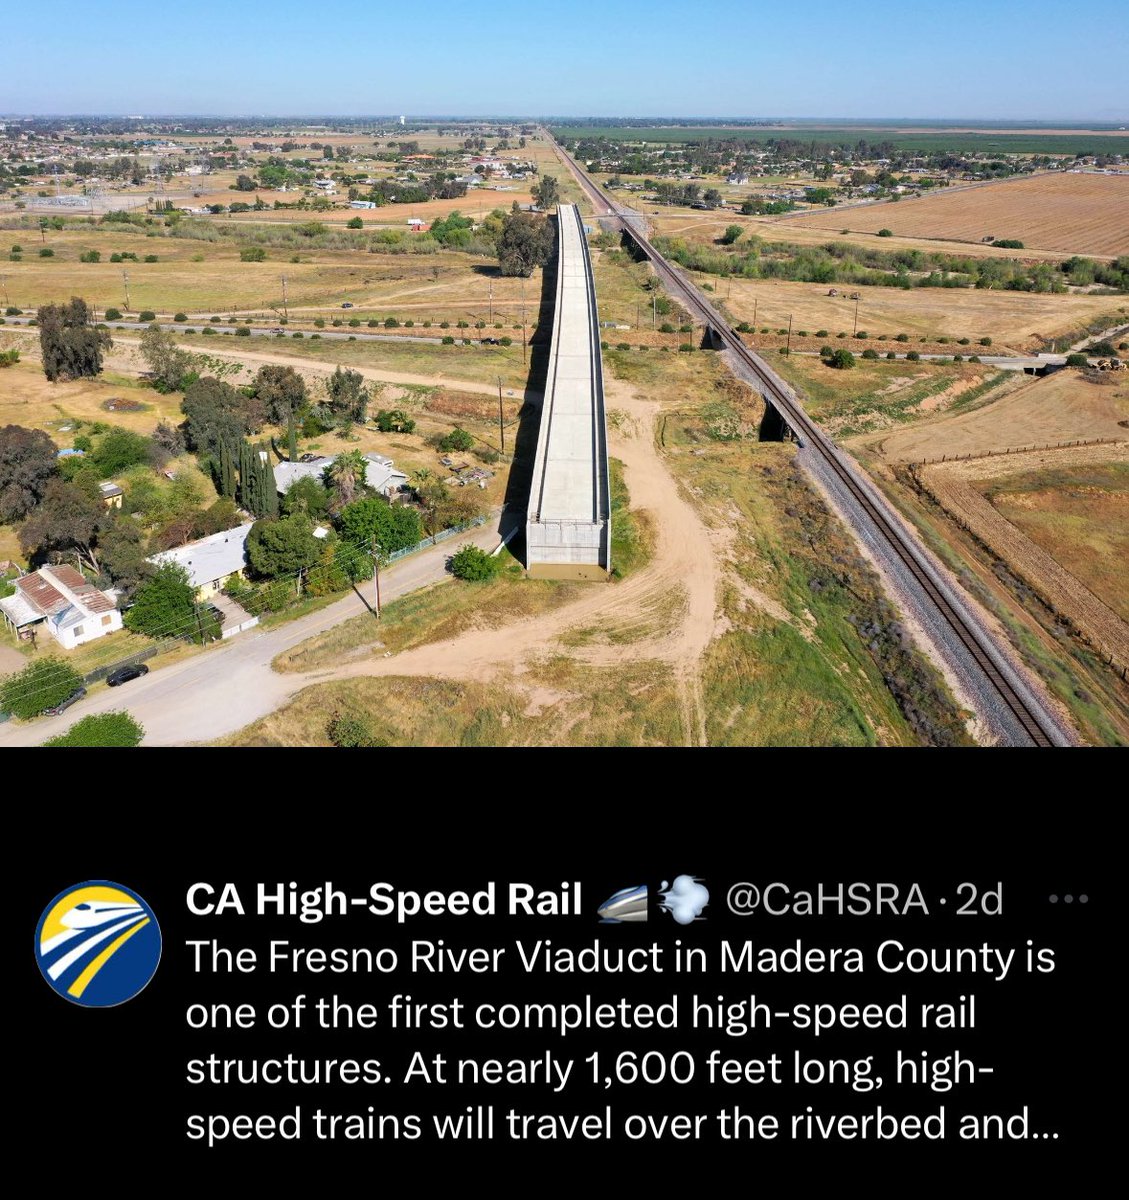 It took 410 days to build the Empire State Building. But it has only been 5,840 days (16 years) for this high speed rail bridge to no where to be built in Fresno, California. Please clap.